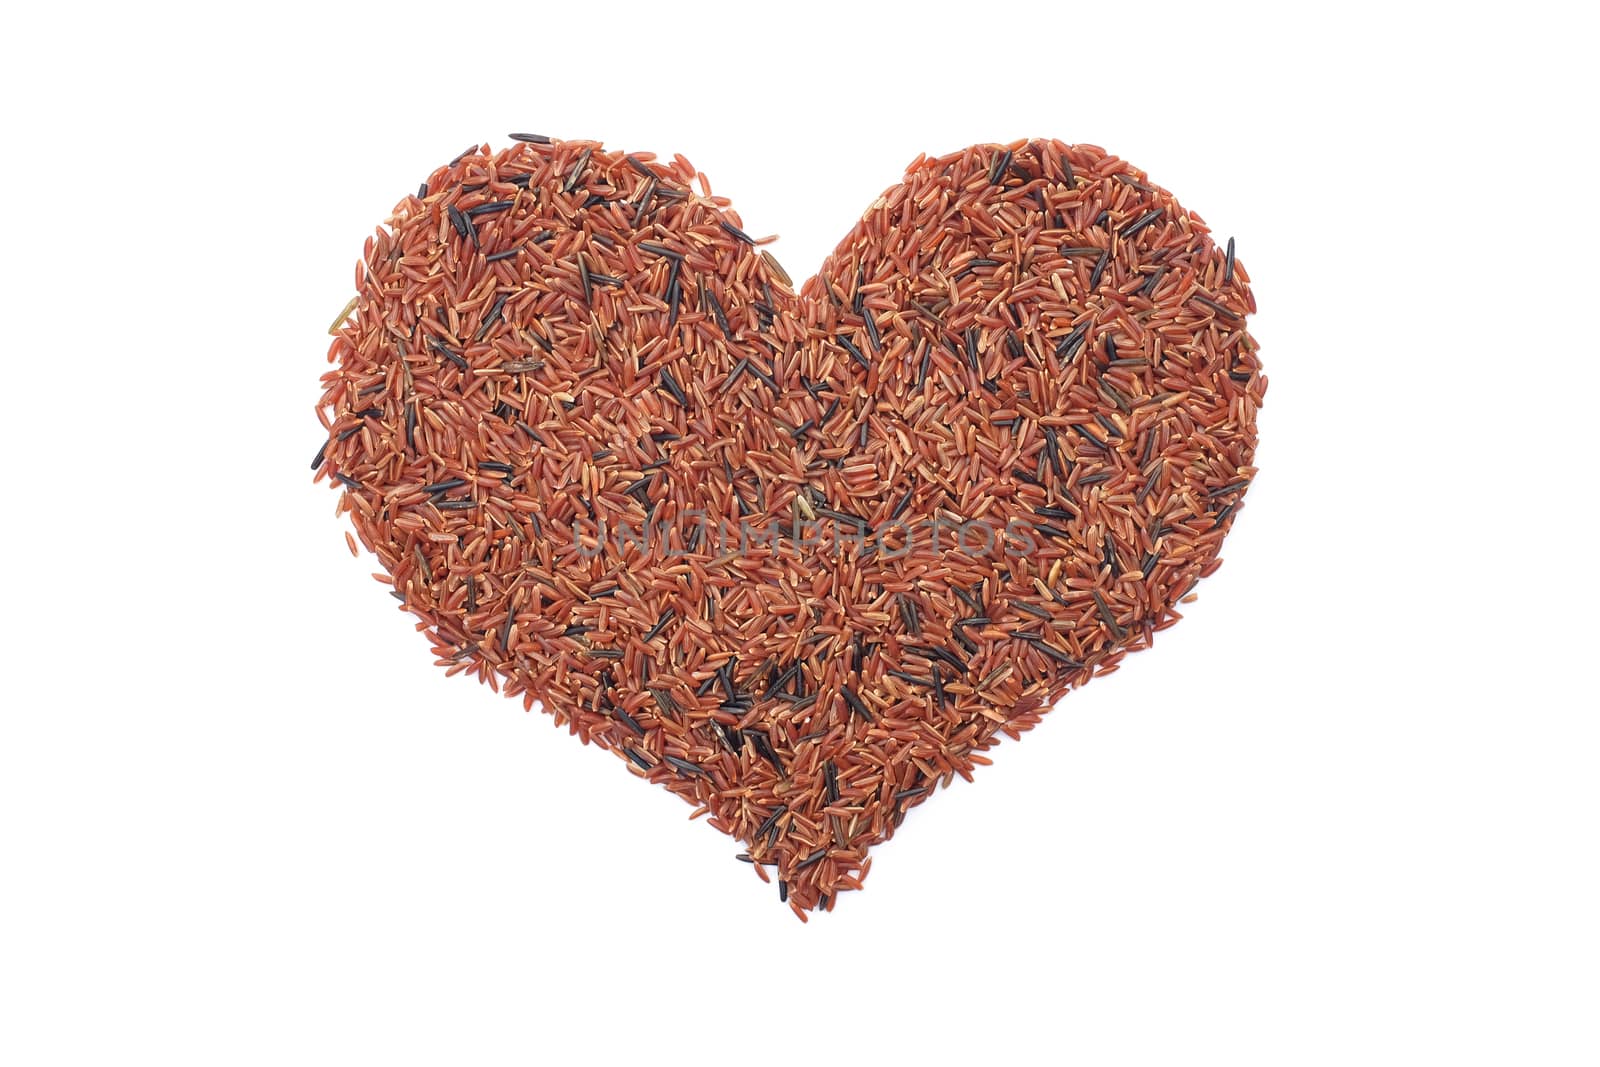 Red camargue rice in a heart shape, isolated on a white background